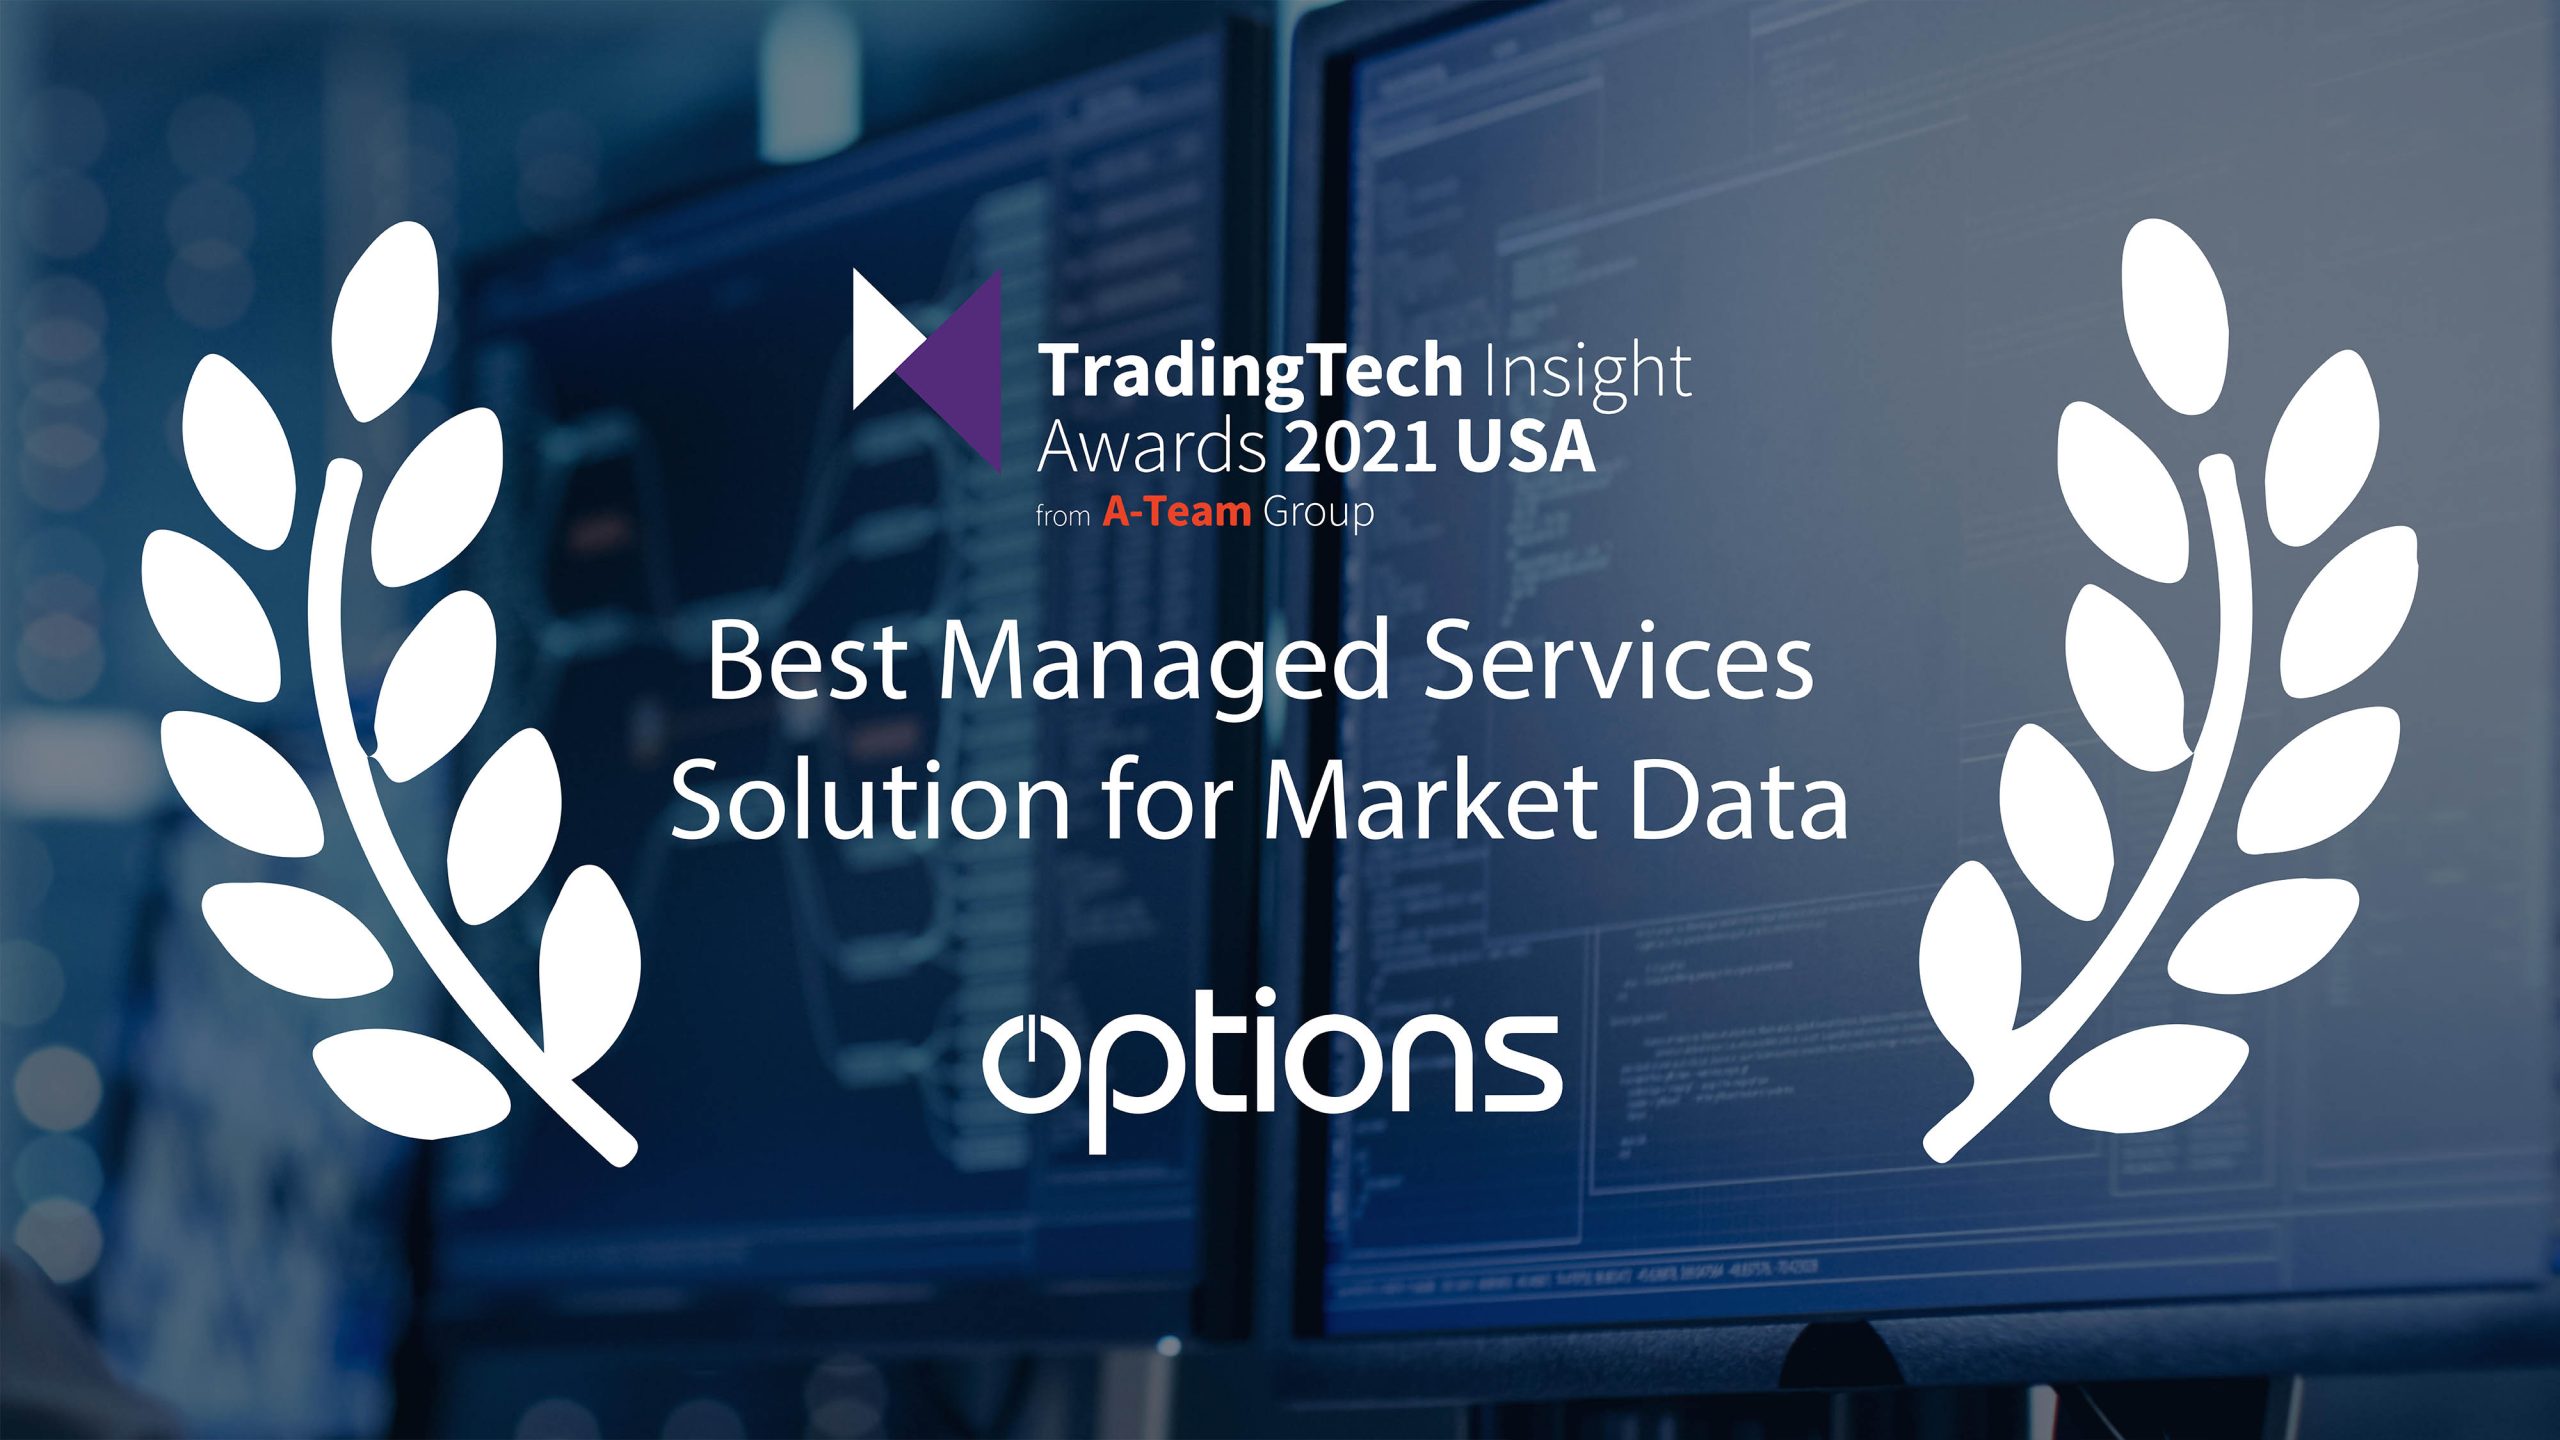 You are currently viewing <strong>Options Announced as ﻿Best Managed Services Solution for Market Data at TradingTech Insights USA Awards</strong>